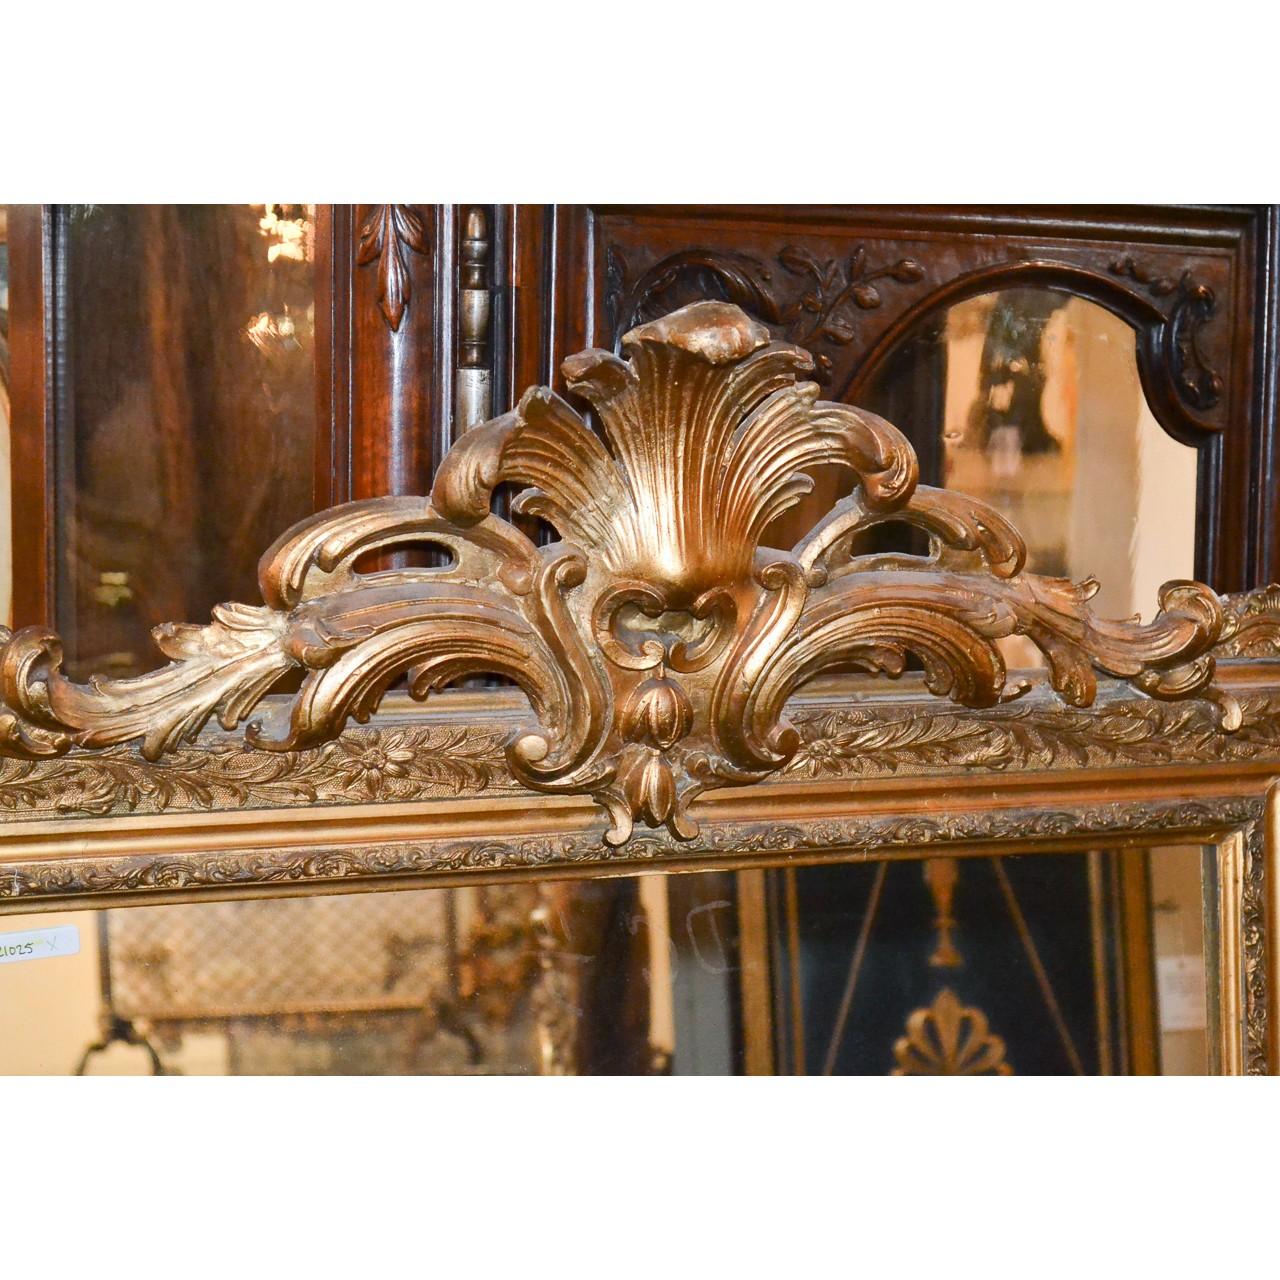 Superb 19th century French Louis XVI style giltwood wall or console mirror with a boldly carved leaf-spray and scrolled acanthus leaf crest. The borders carved in relief with meandering vines and flower heads,

circa 1880.